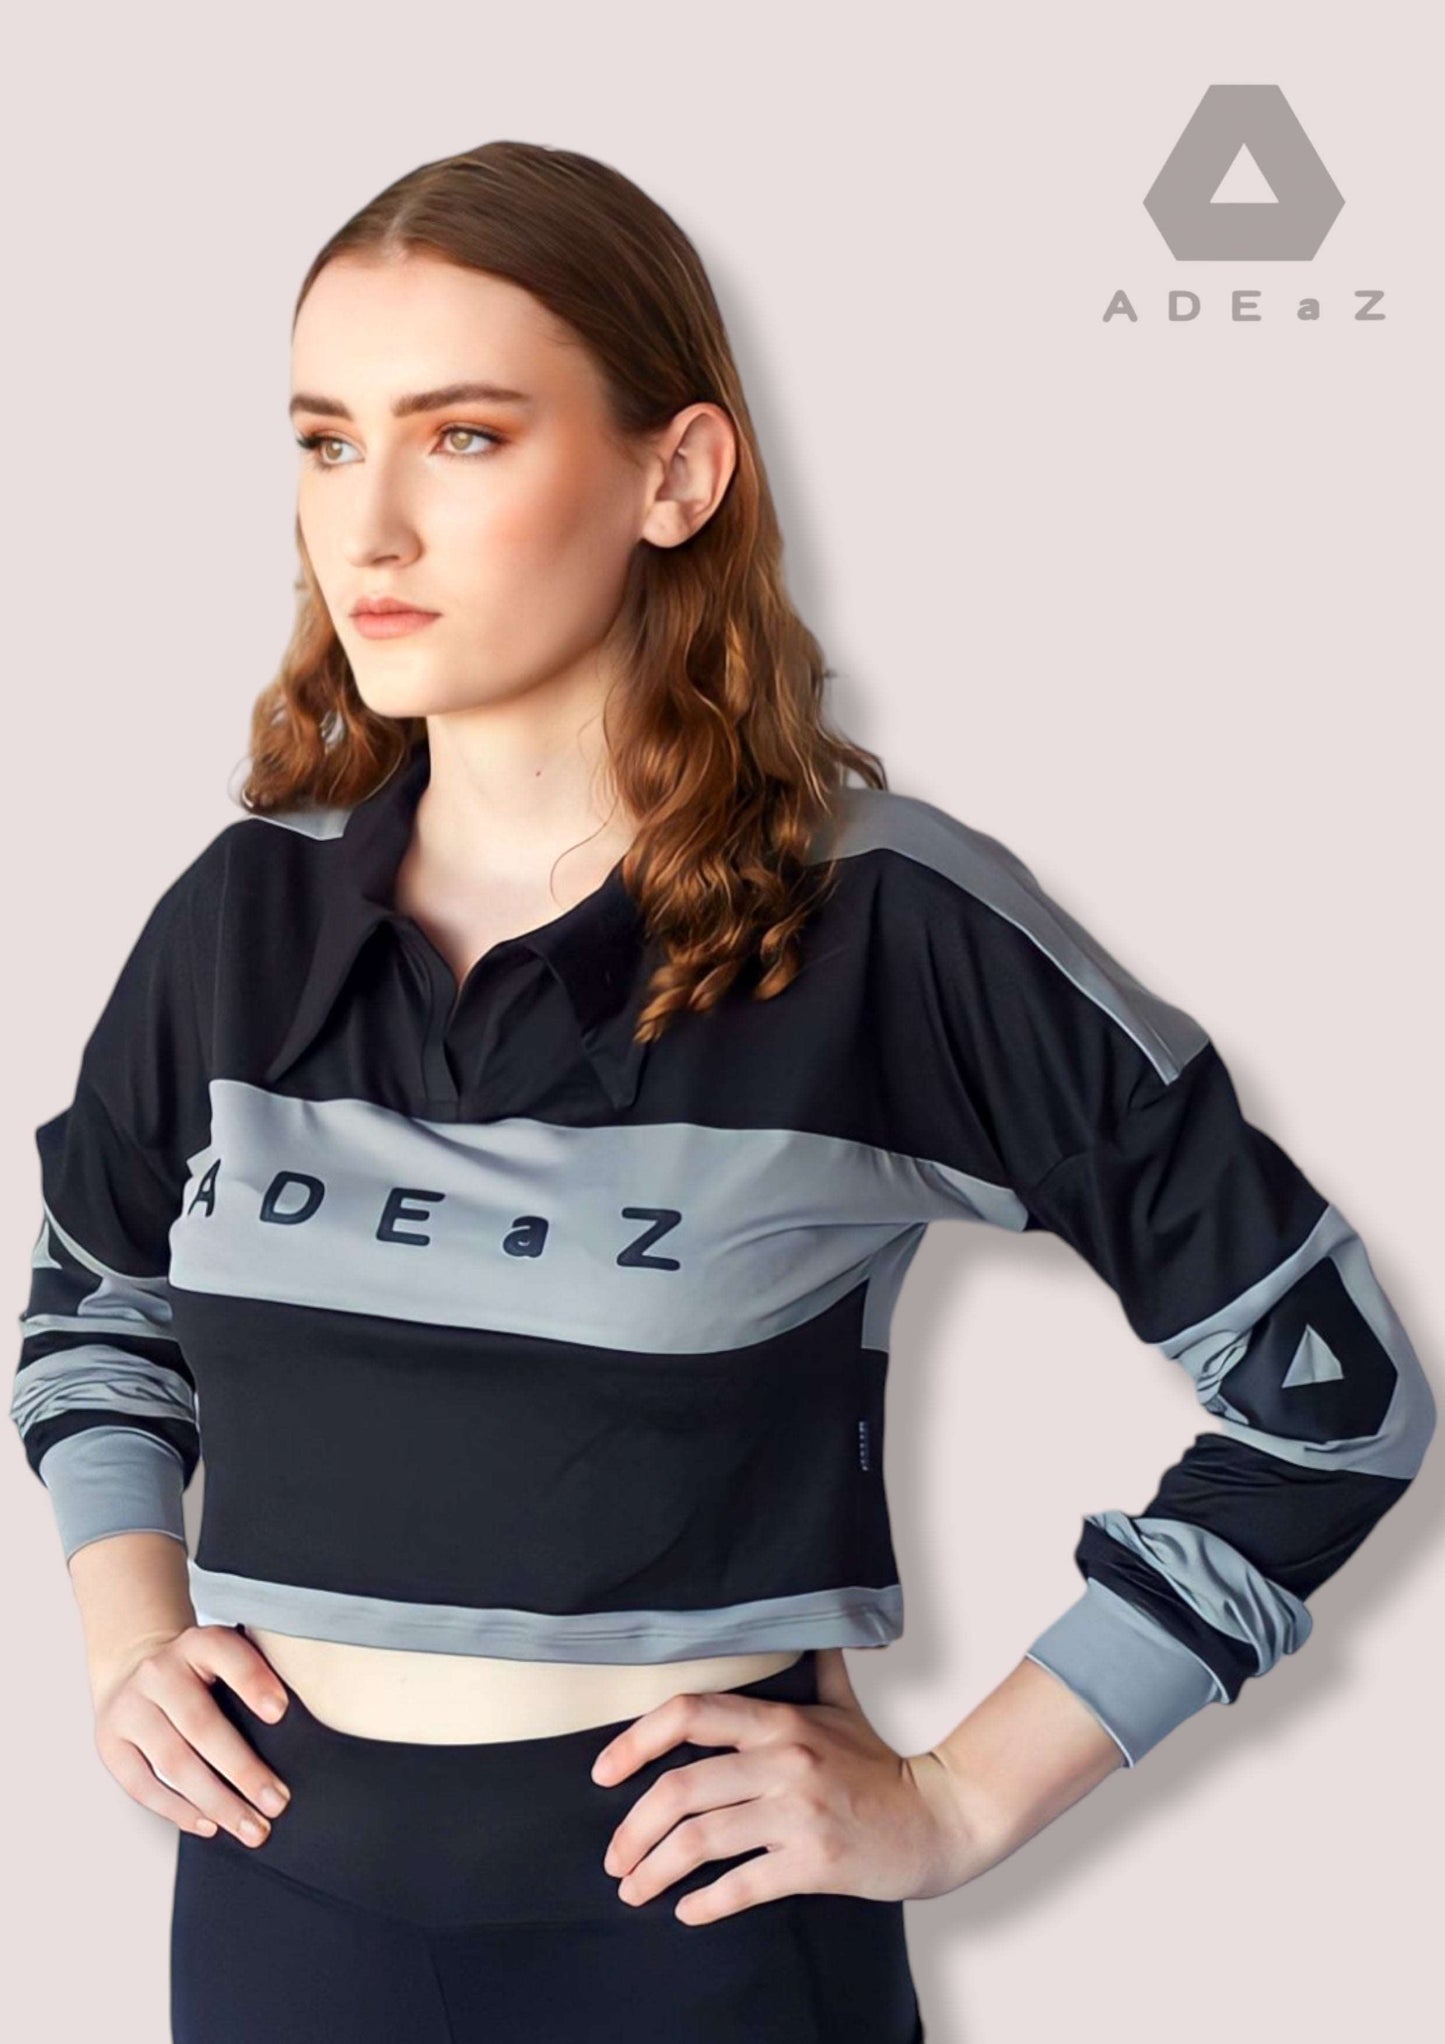 Women's long-sleeve collar crop top in soft colors, offering a stylish blend of sophistication and trendy design.